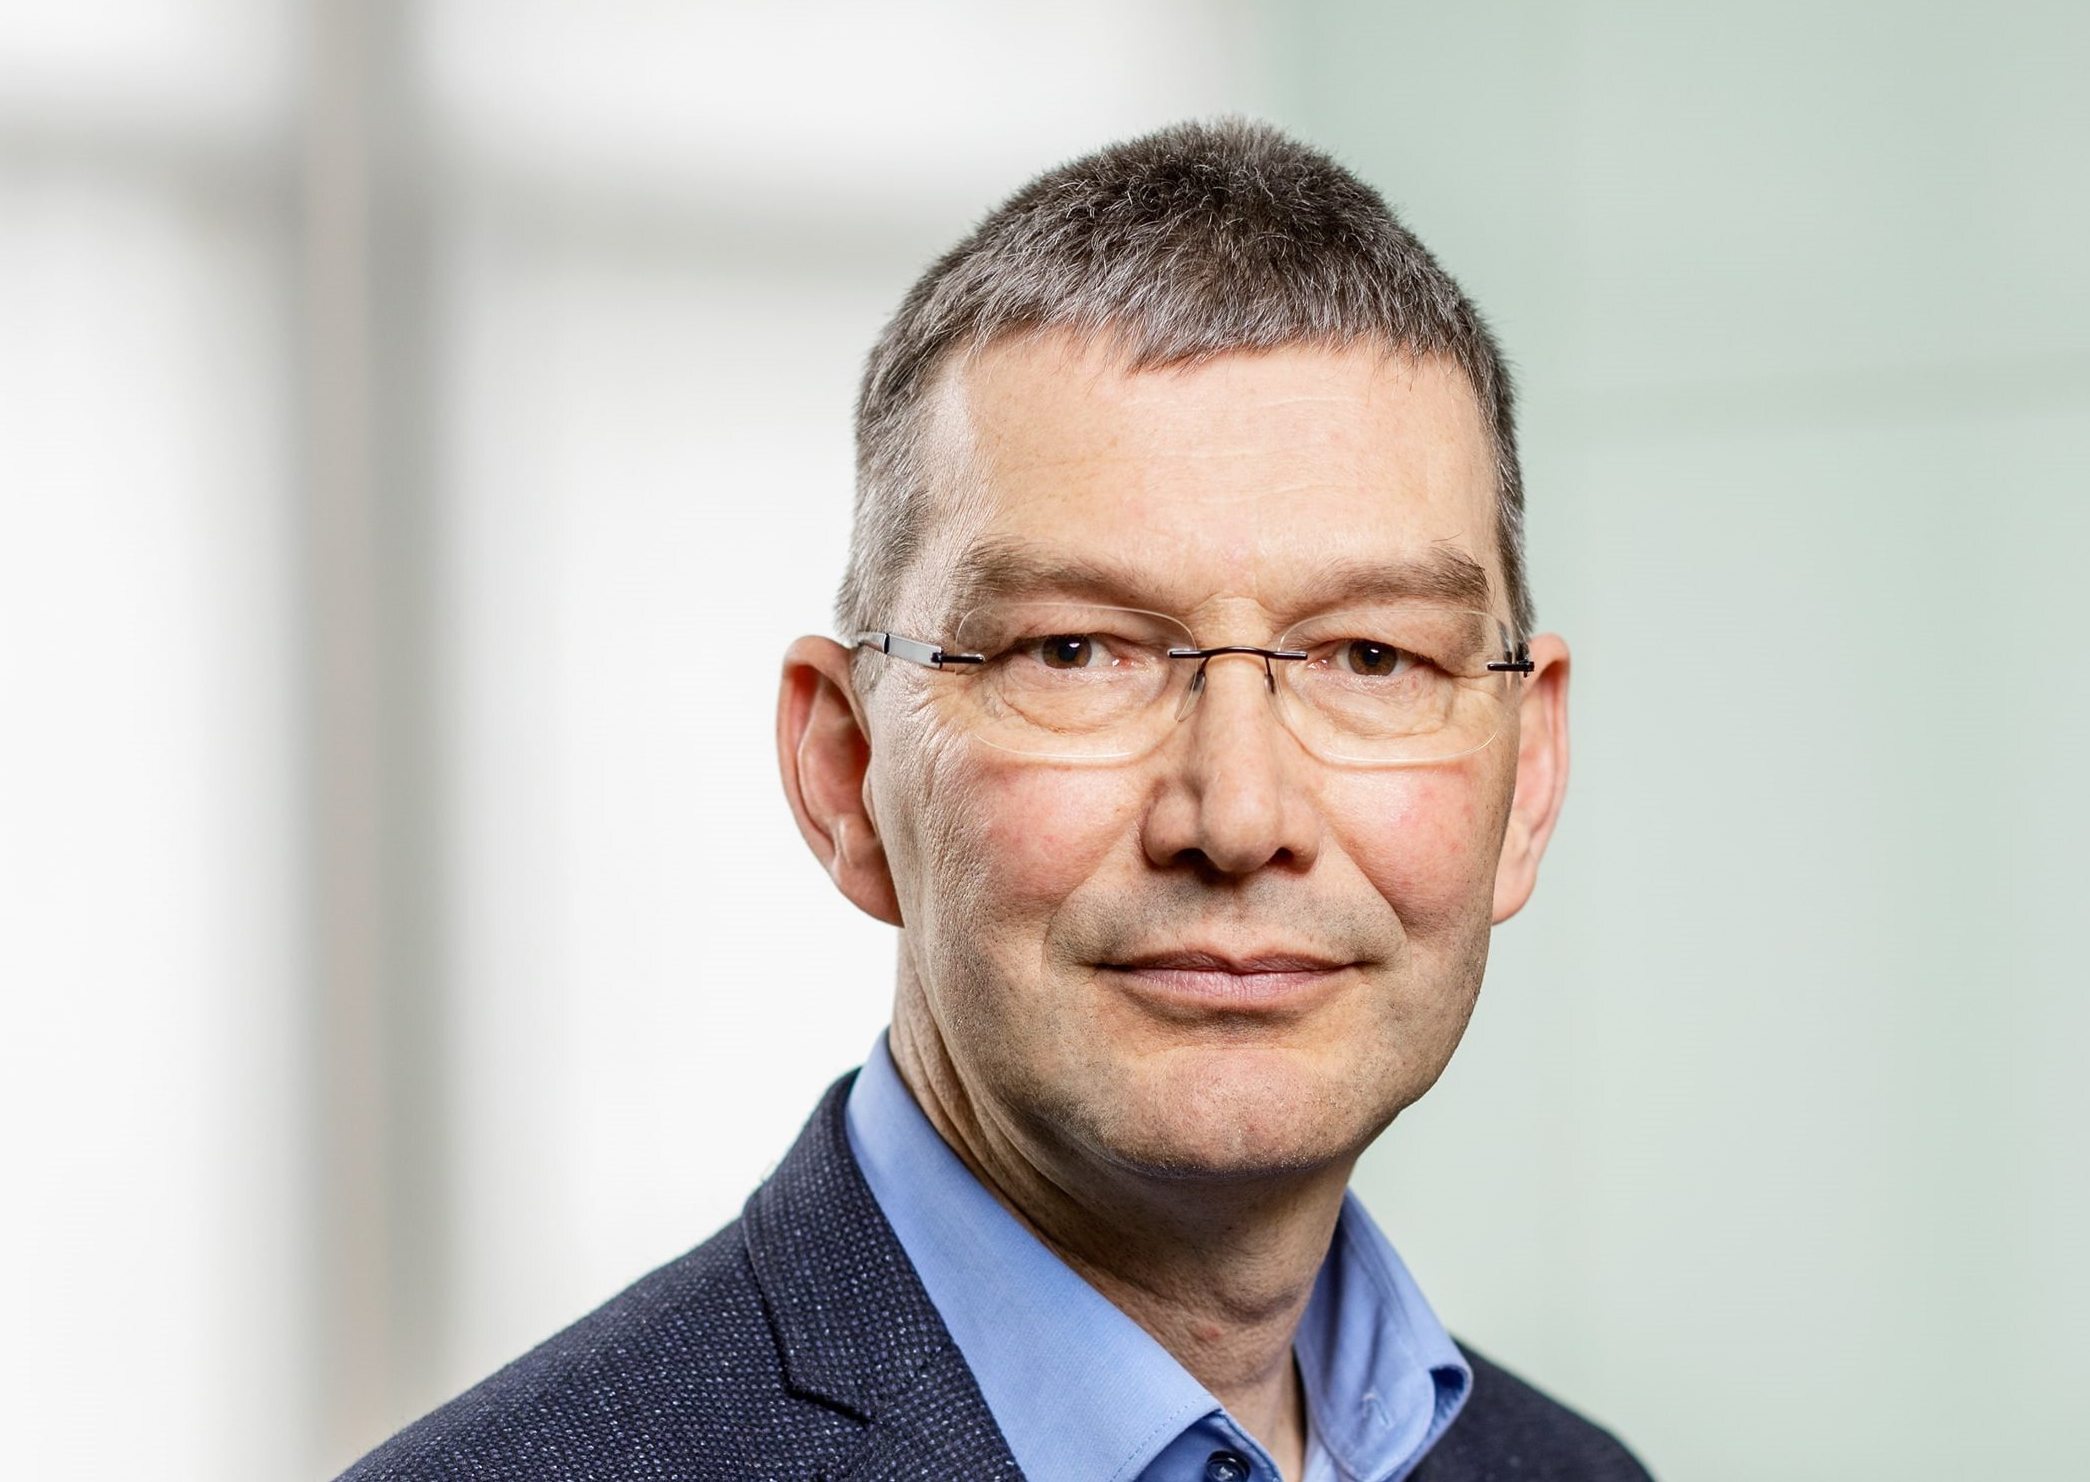 Jan Lucht works for scienceindustries – Business Association Chemistry Pharma Life Sciences as the Head of Biotechnology.